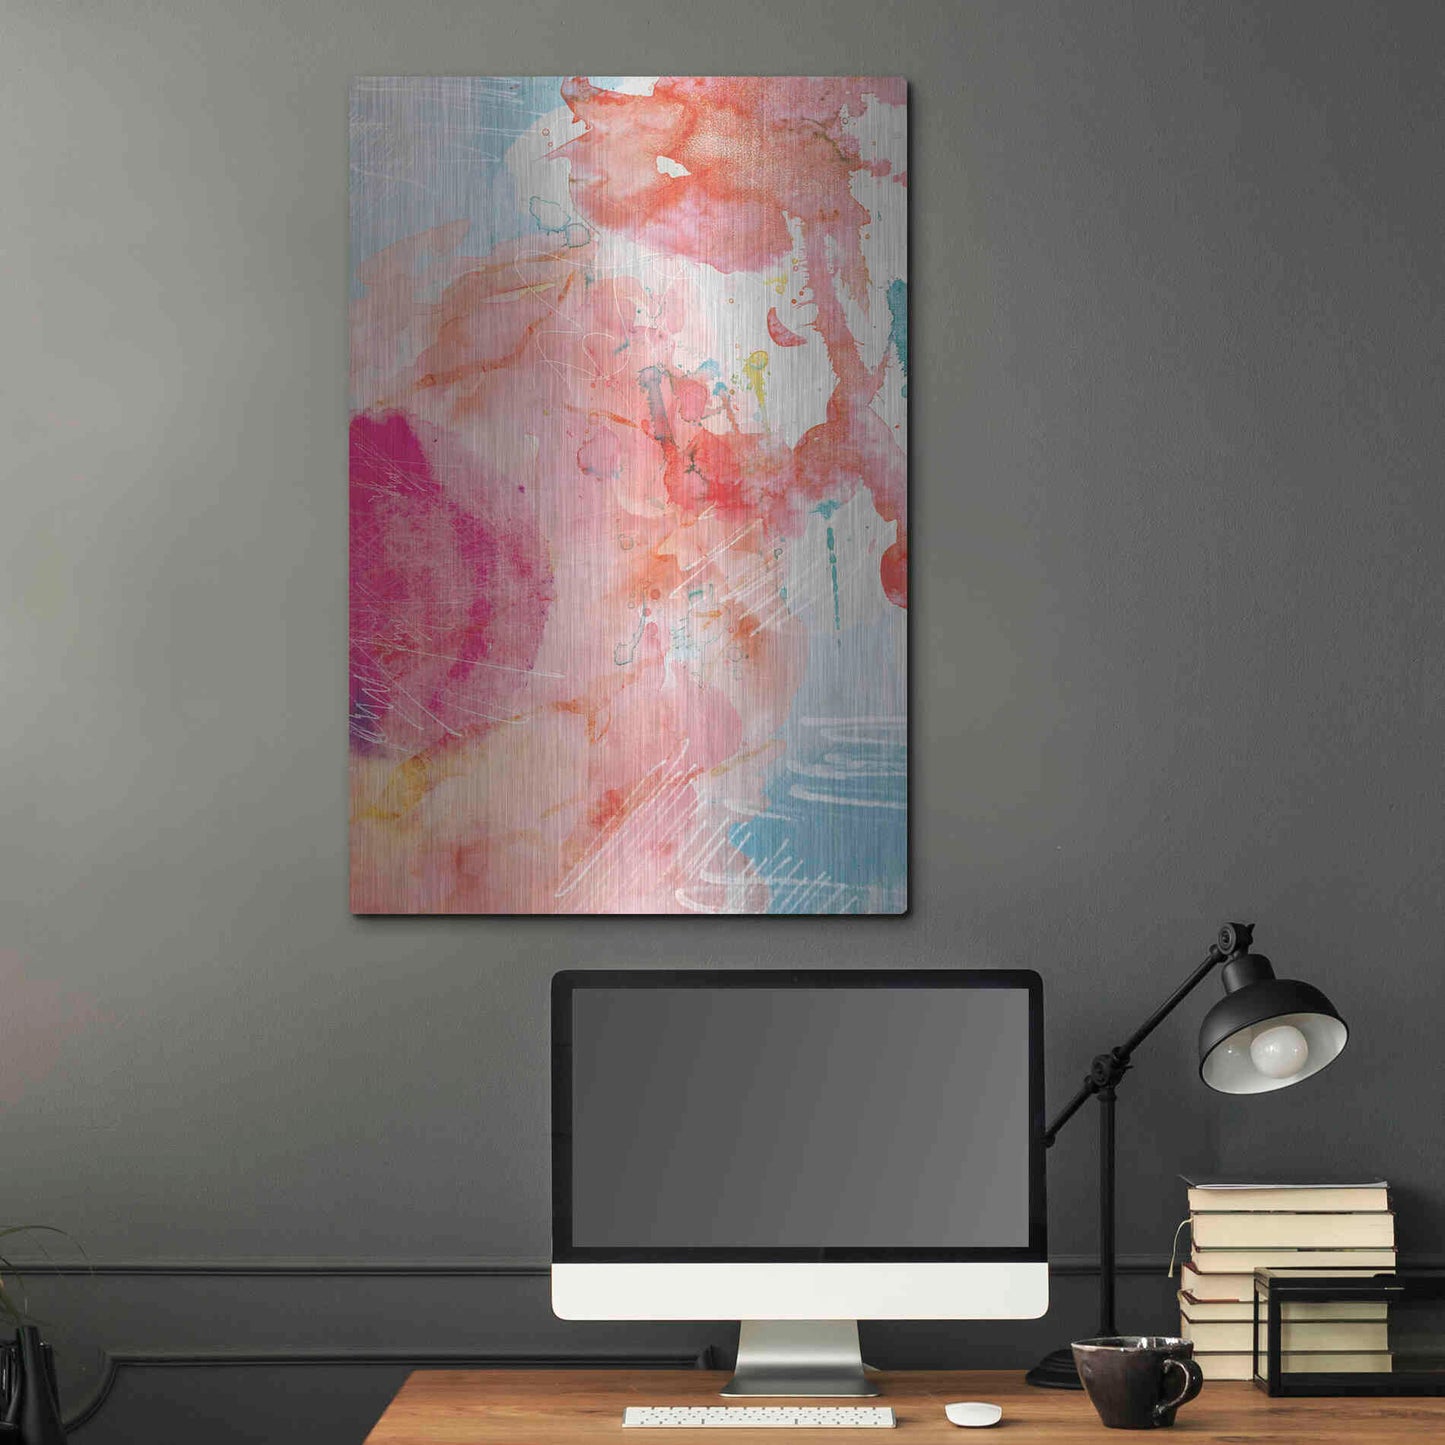 Luxe Metal Art 'Abstract Turquoise Pink No. 1' by Louis Duncan-He, Metal Wall Art,24x36